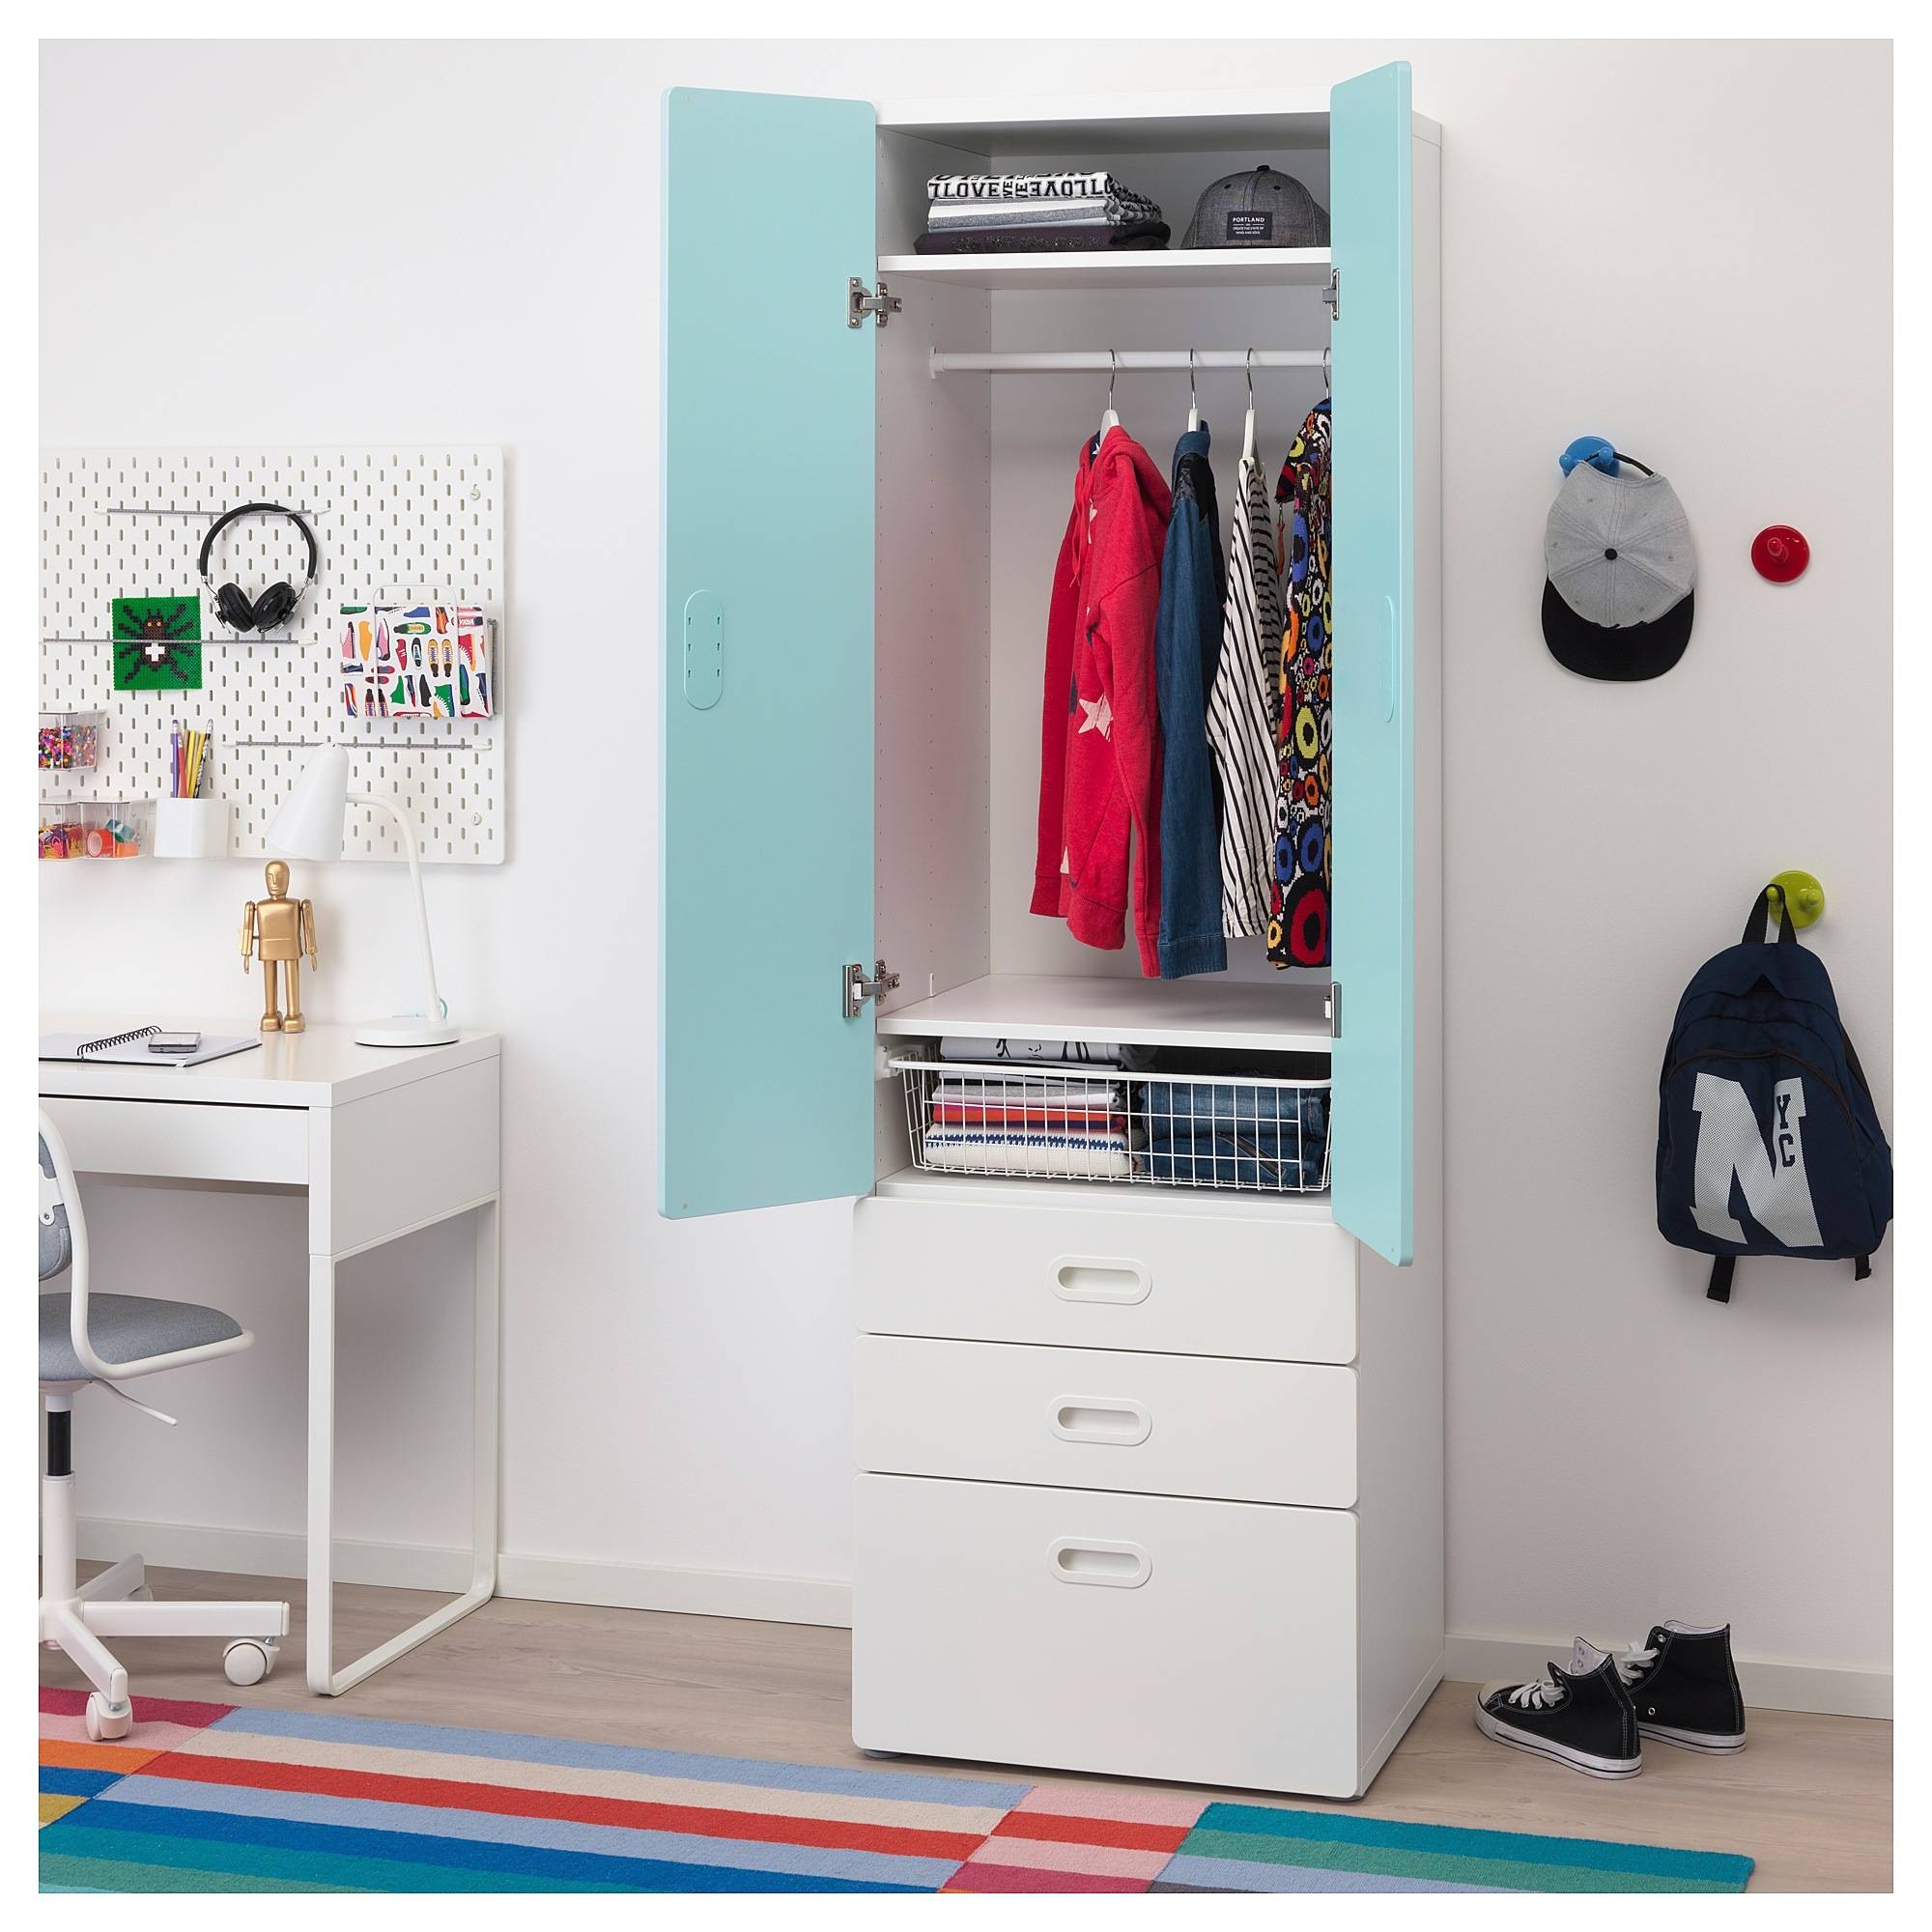 Blue and white wardrobe in colorful kid's room